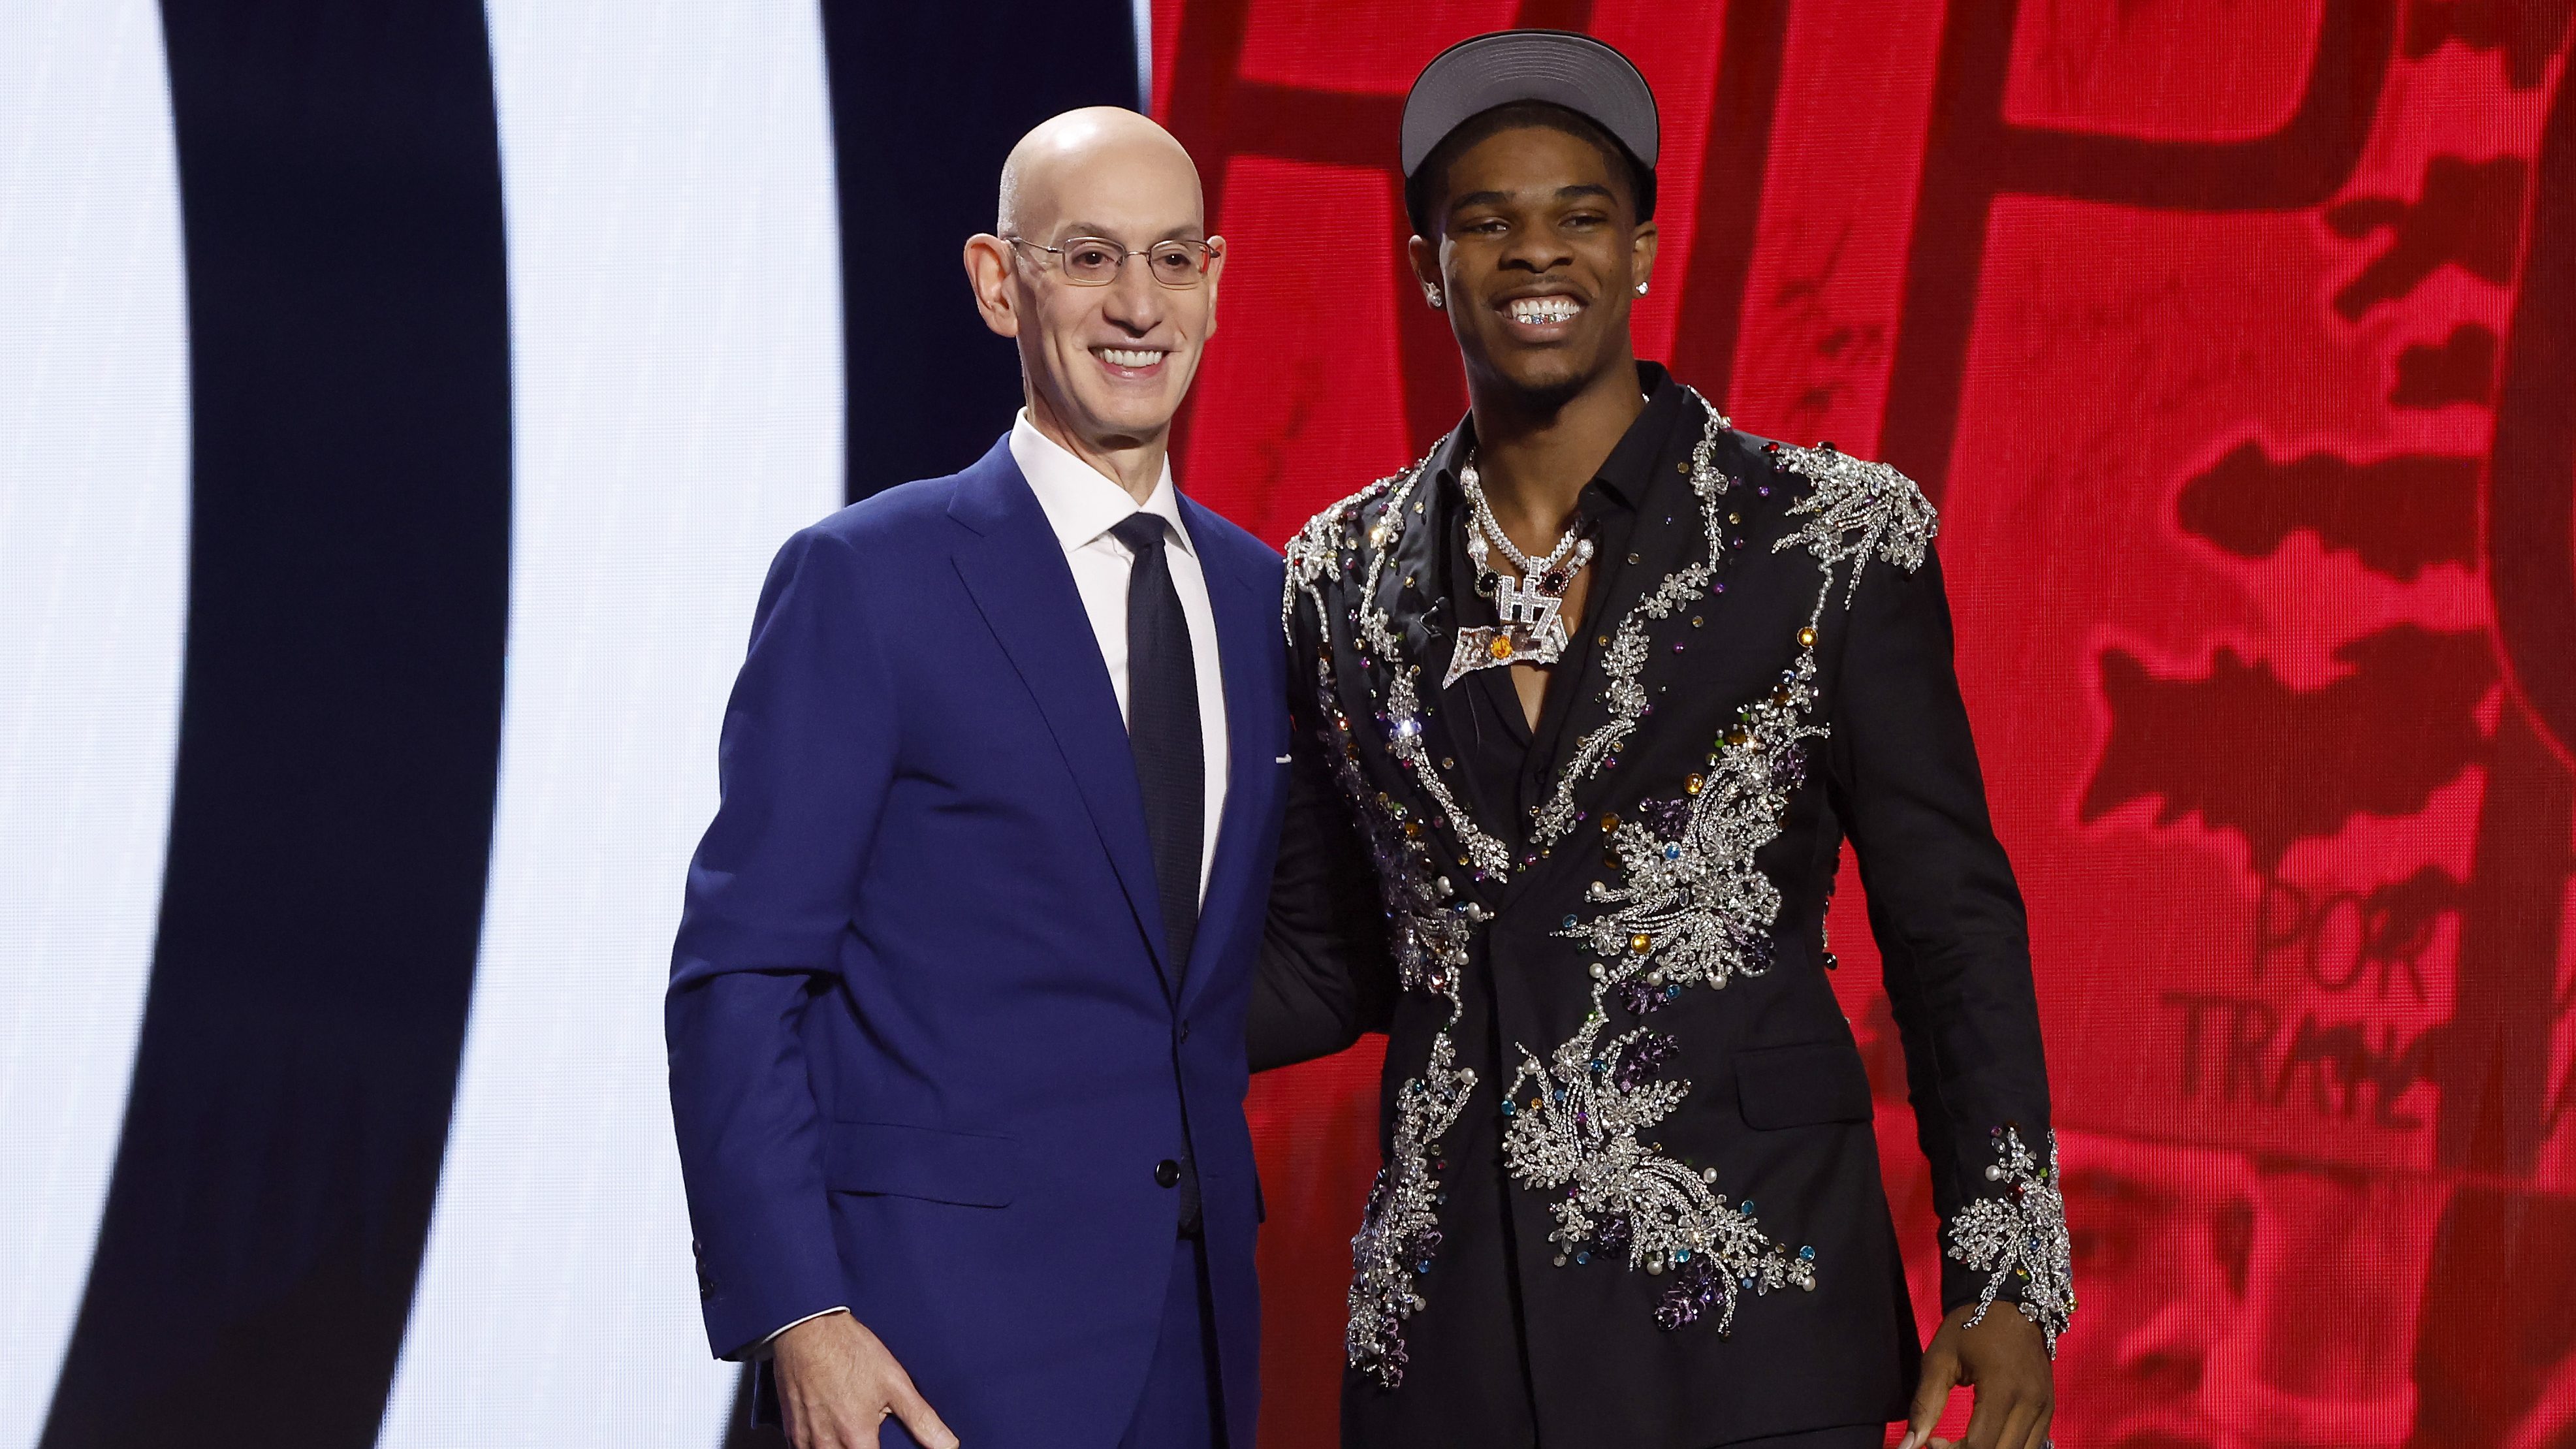 Sky Sports' 2023 NBA Draft Explained: Trades, first-round picks